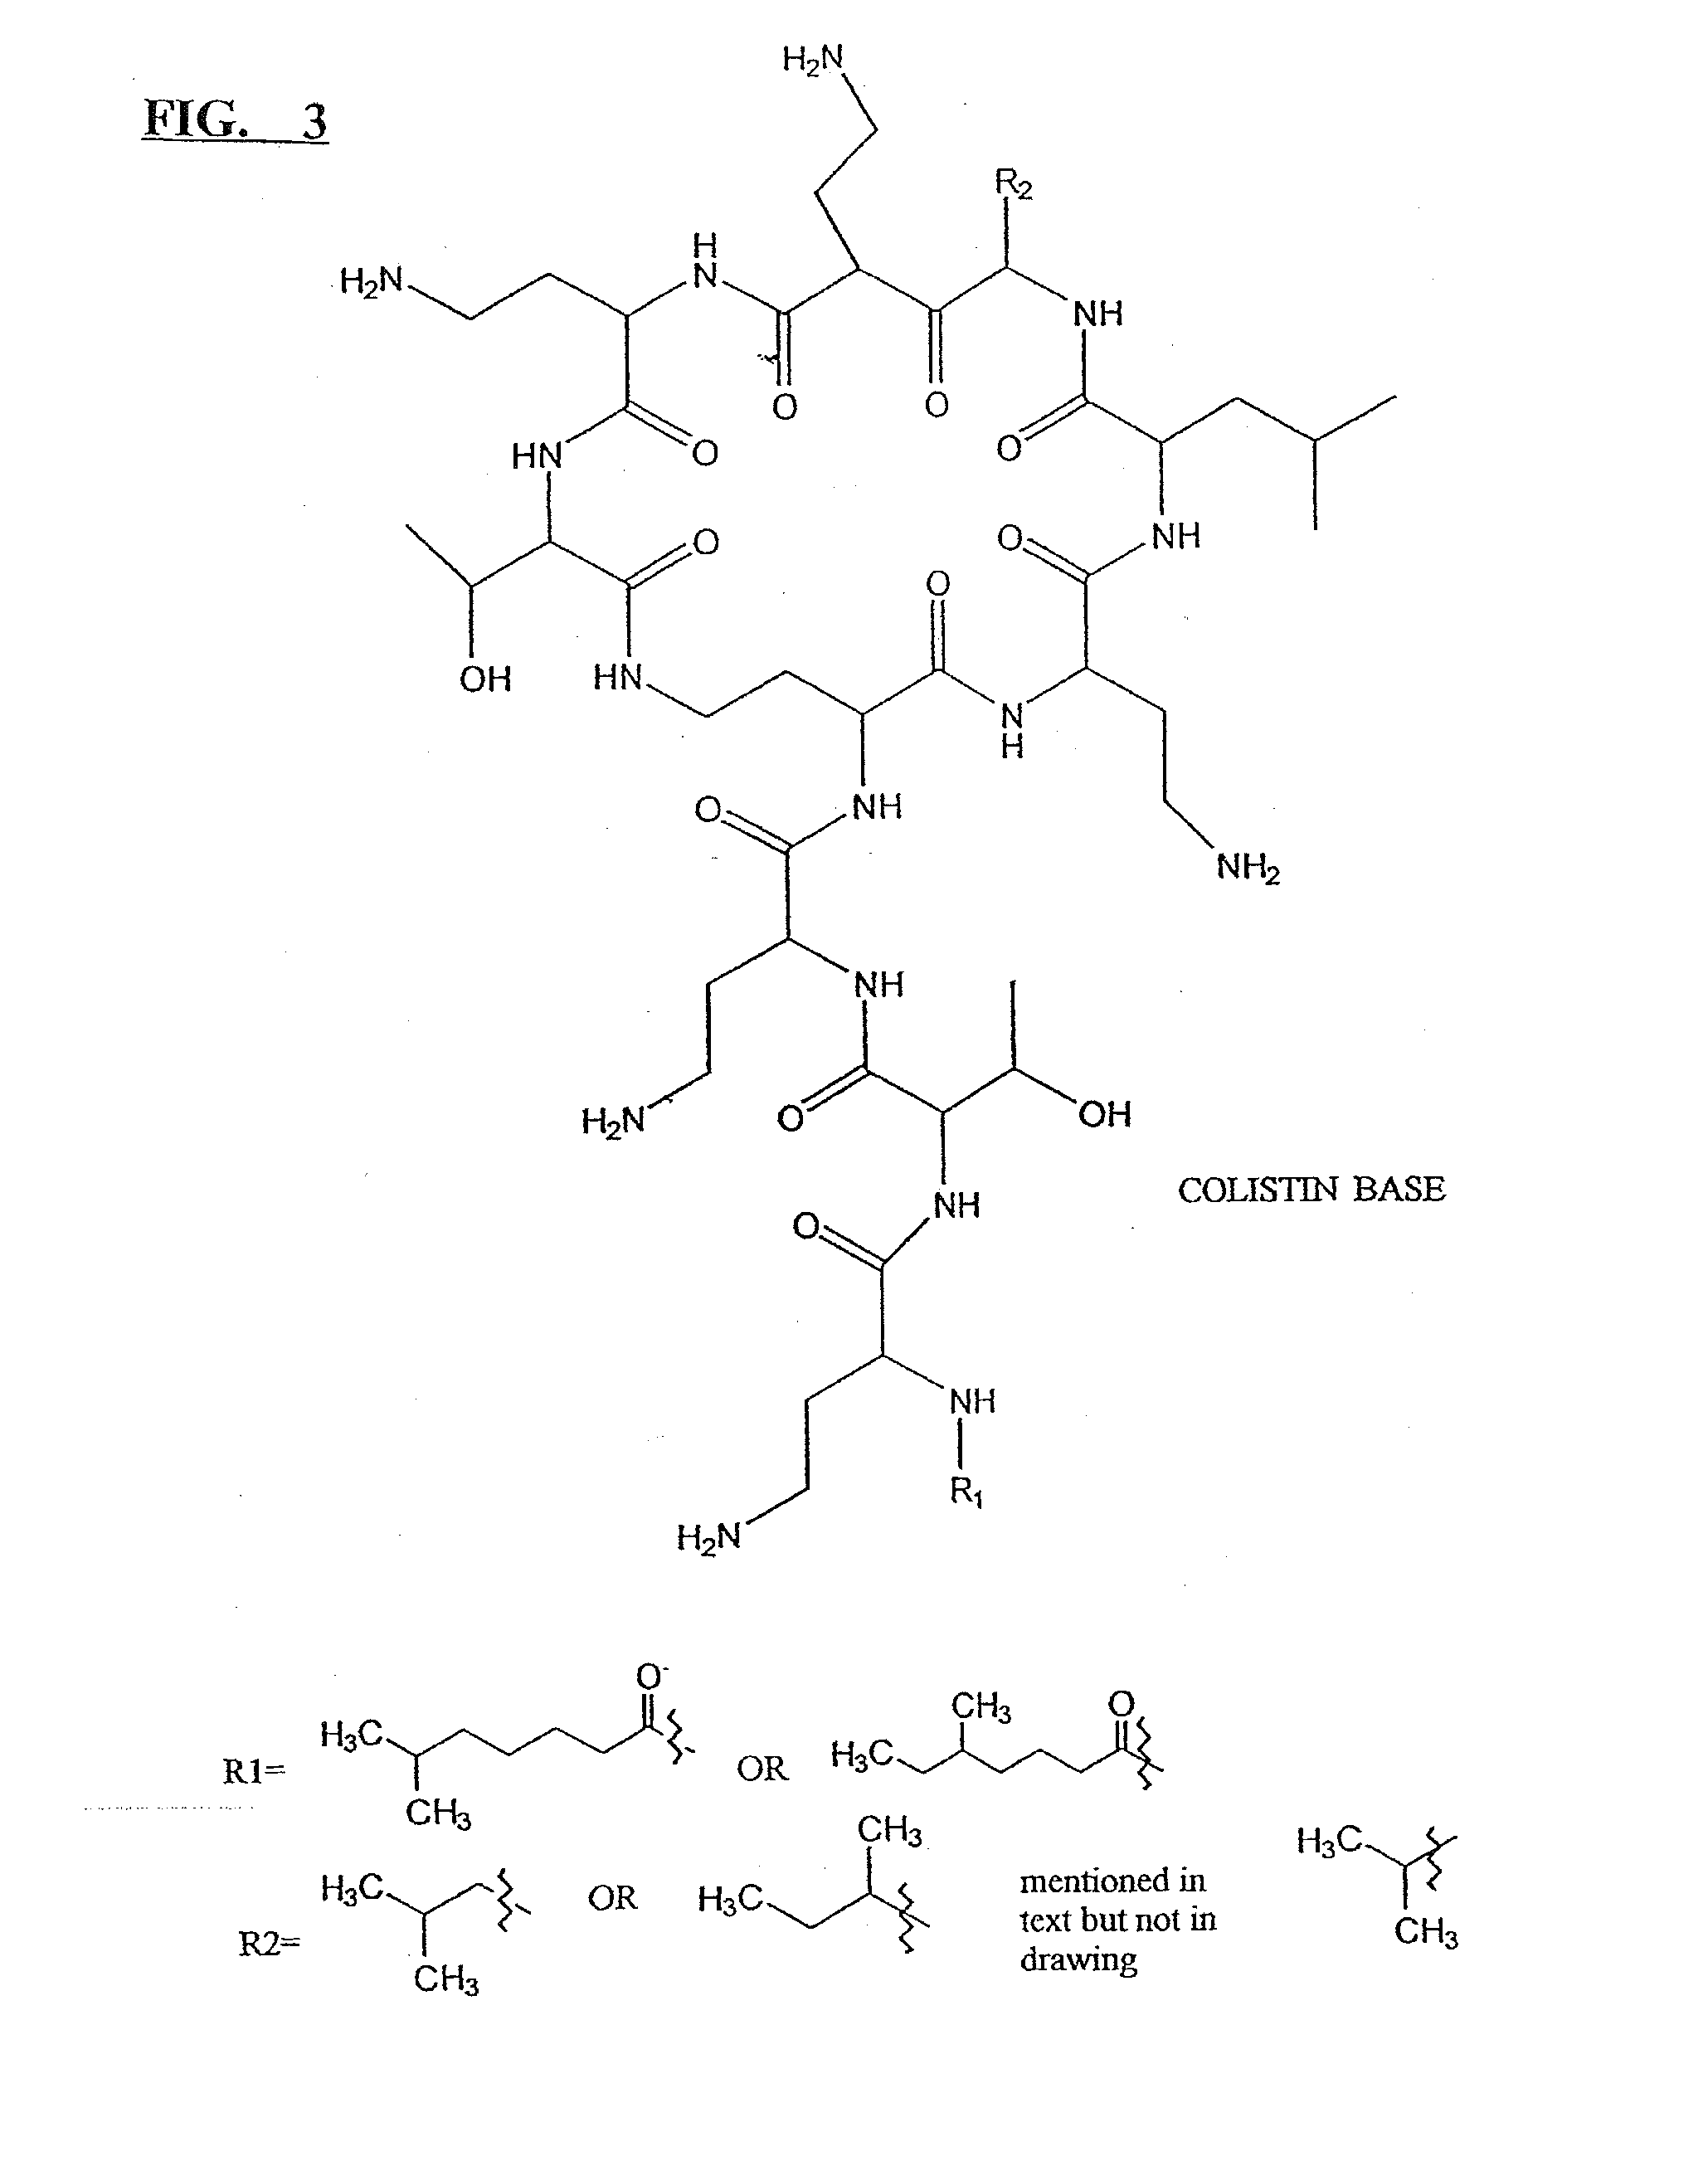 Micronized pharmaceutical compositions